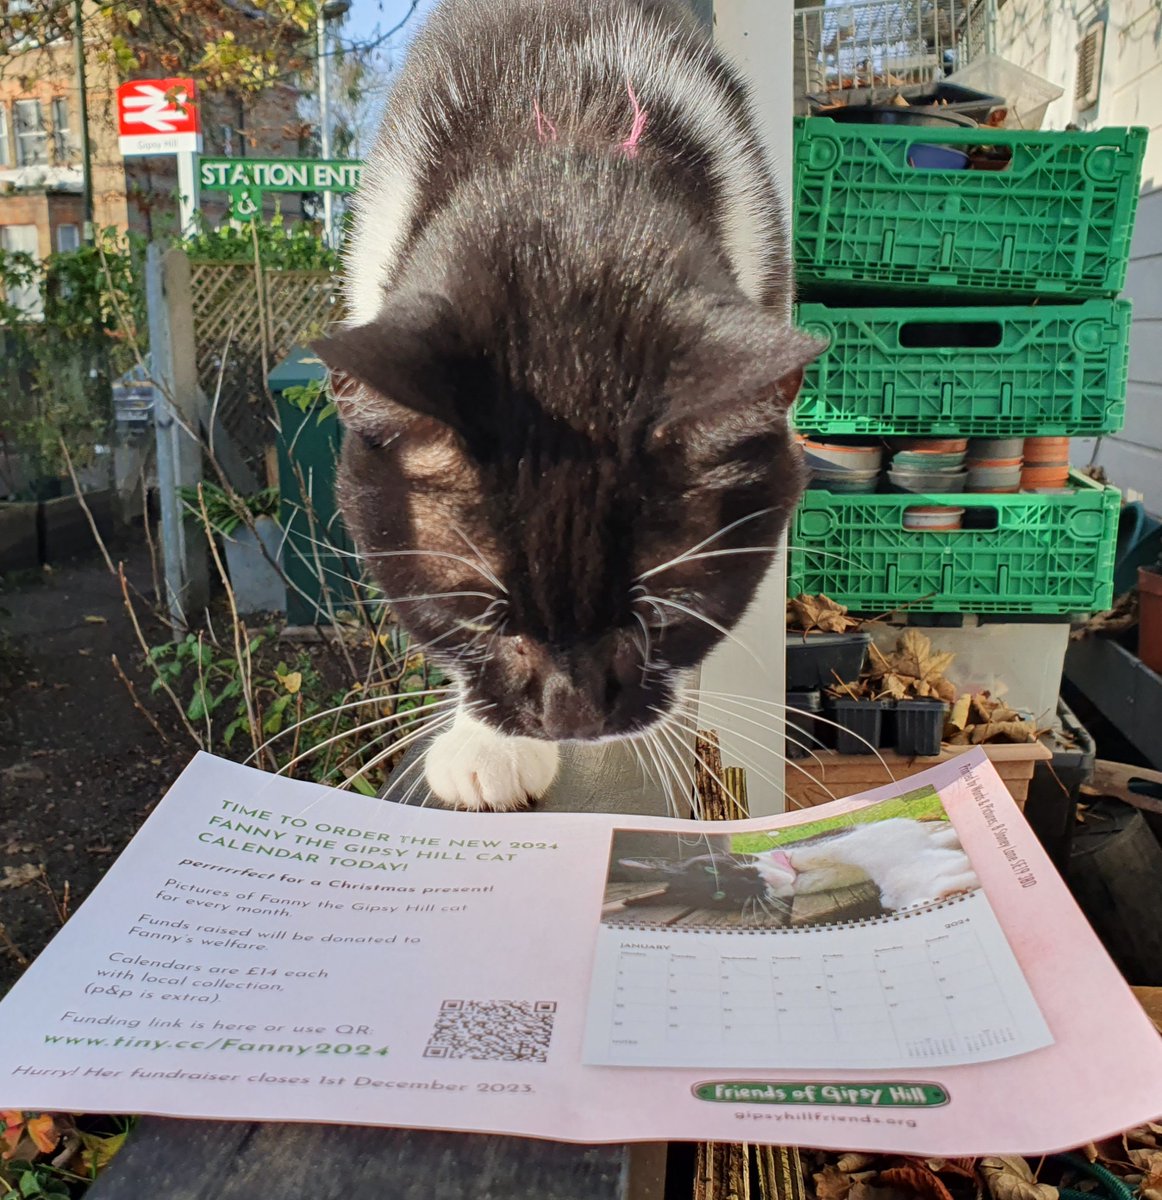 LAST FEW DAYS 👀 to get your 🐾 paws on Fanny @TheGipsyHillCat calander 2024! See link for details ➡️ gipsyhillfriends.org/2023/10/22/fan…